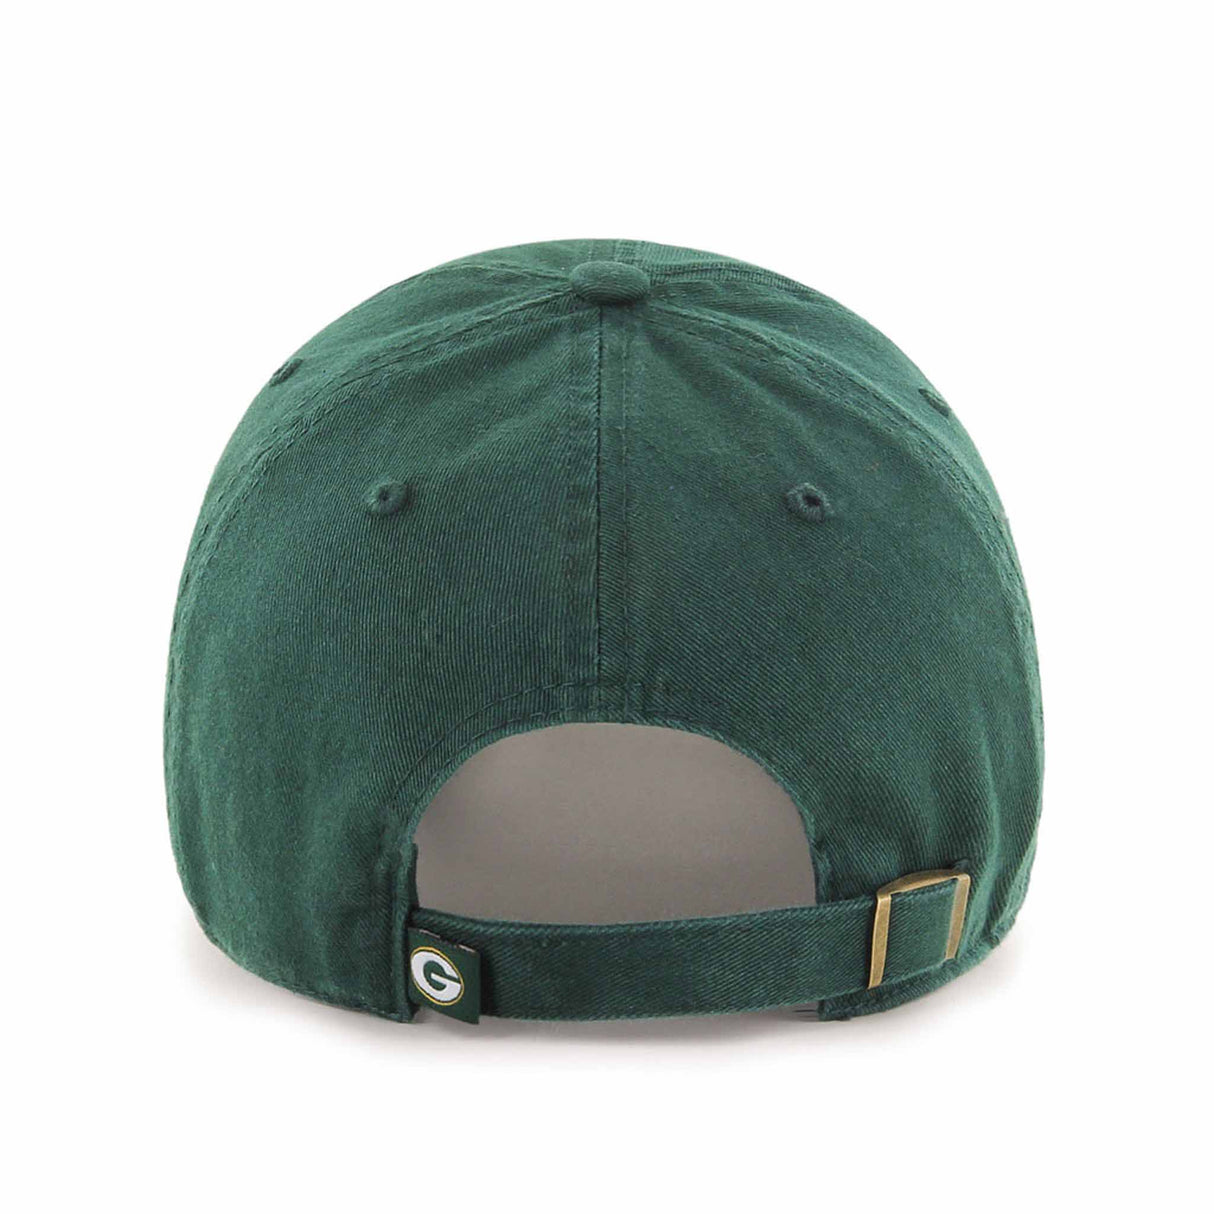 Casquette 47 Brand Clean Up NFL Green Bay Packers - Vert - dos